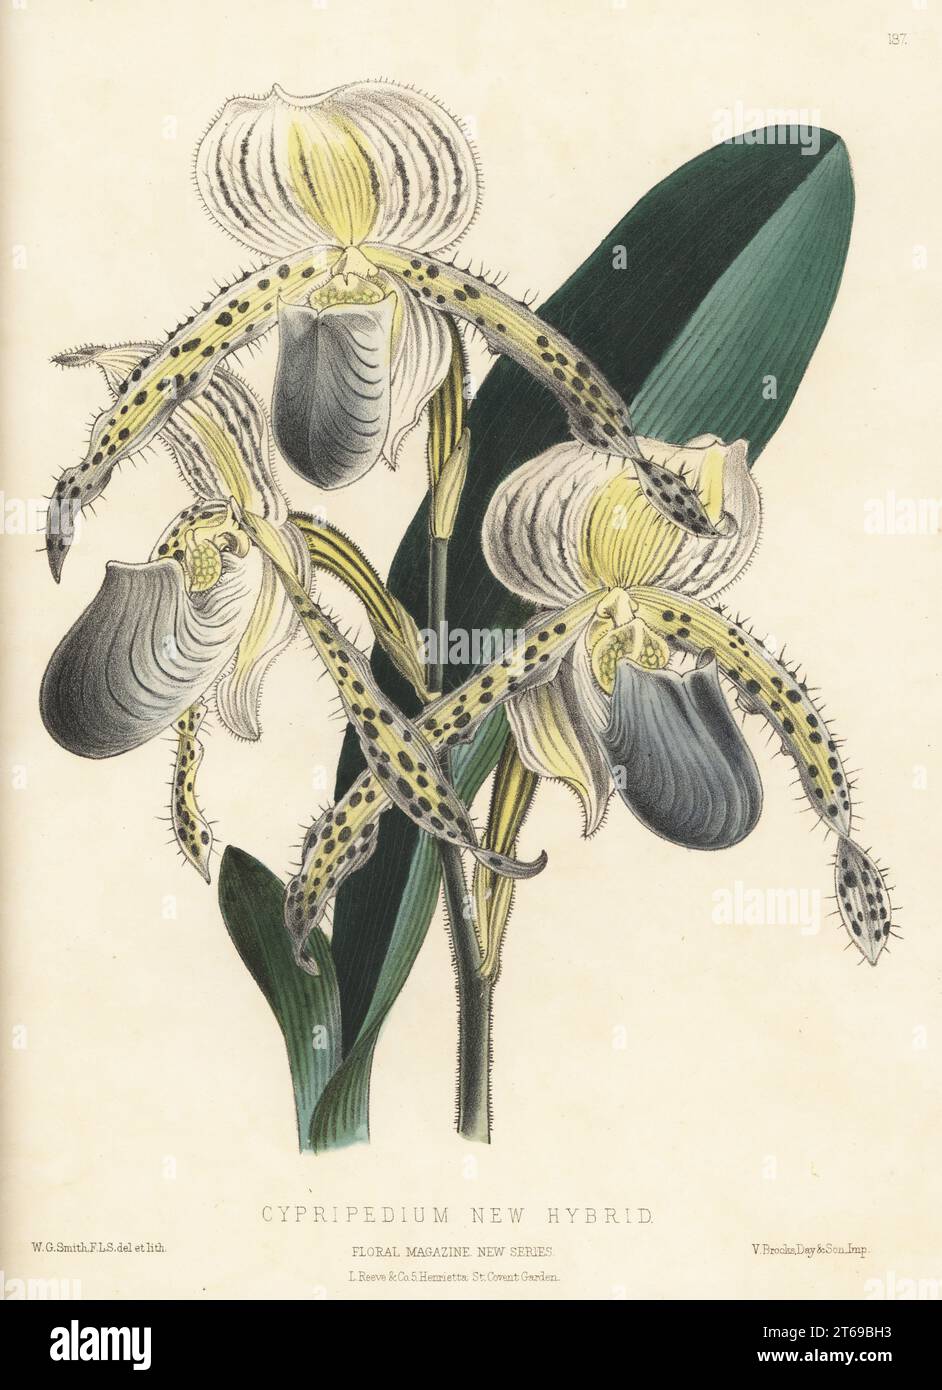 Paphiopedilum orchid hybrid. Cypripedium new hybrid. Cross of Paphiopedilum barbatum (C. barbatum) x Paphiopedilum stonei (C. stonei). Raised by Mr Seden of James Veitch and Sons, Chelsea. Handcolored botanical illustration drawn and lithographed by Worthington George Smith from Henry Honywood Dombrain's Floral Magazine, New Series, Volume 4, L. Reeve, London, 1875. Lithograph printed by Vincent Brooks, Day & Son. Stock Photo